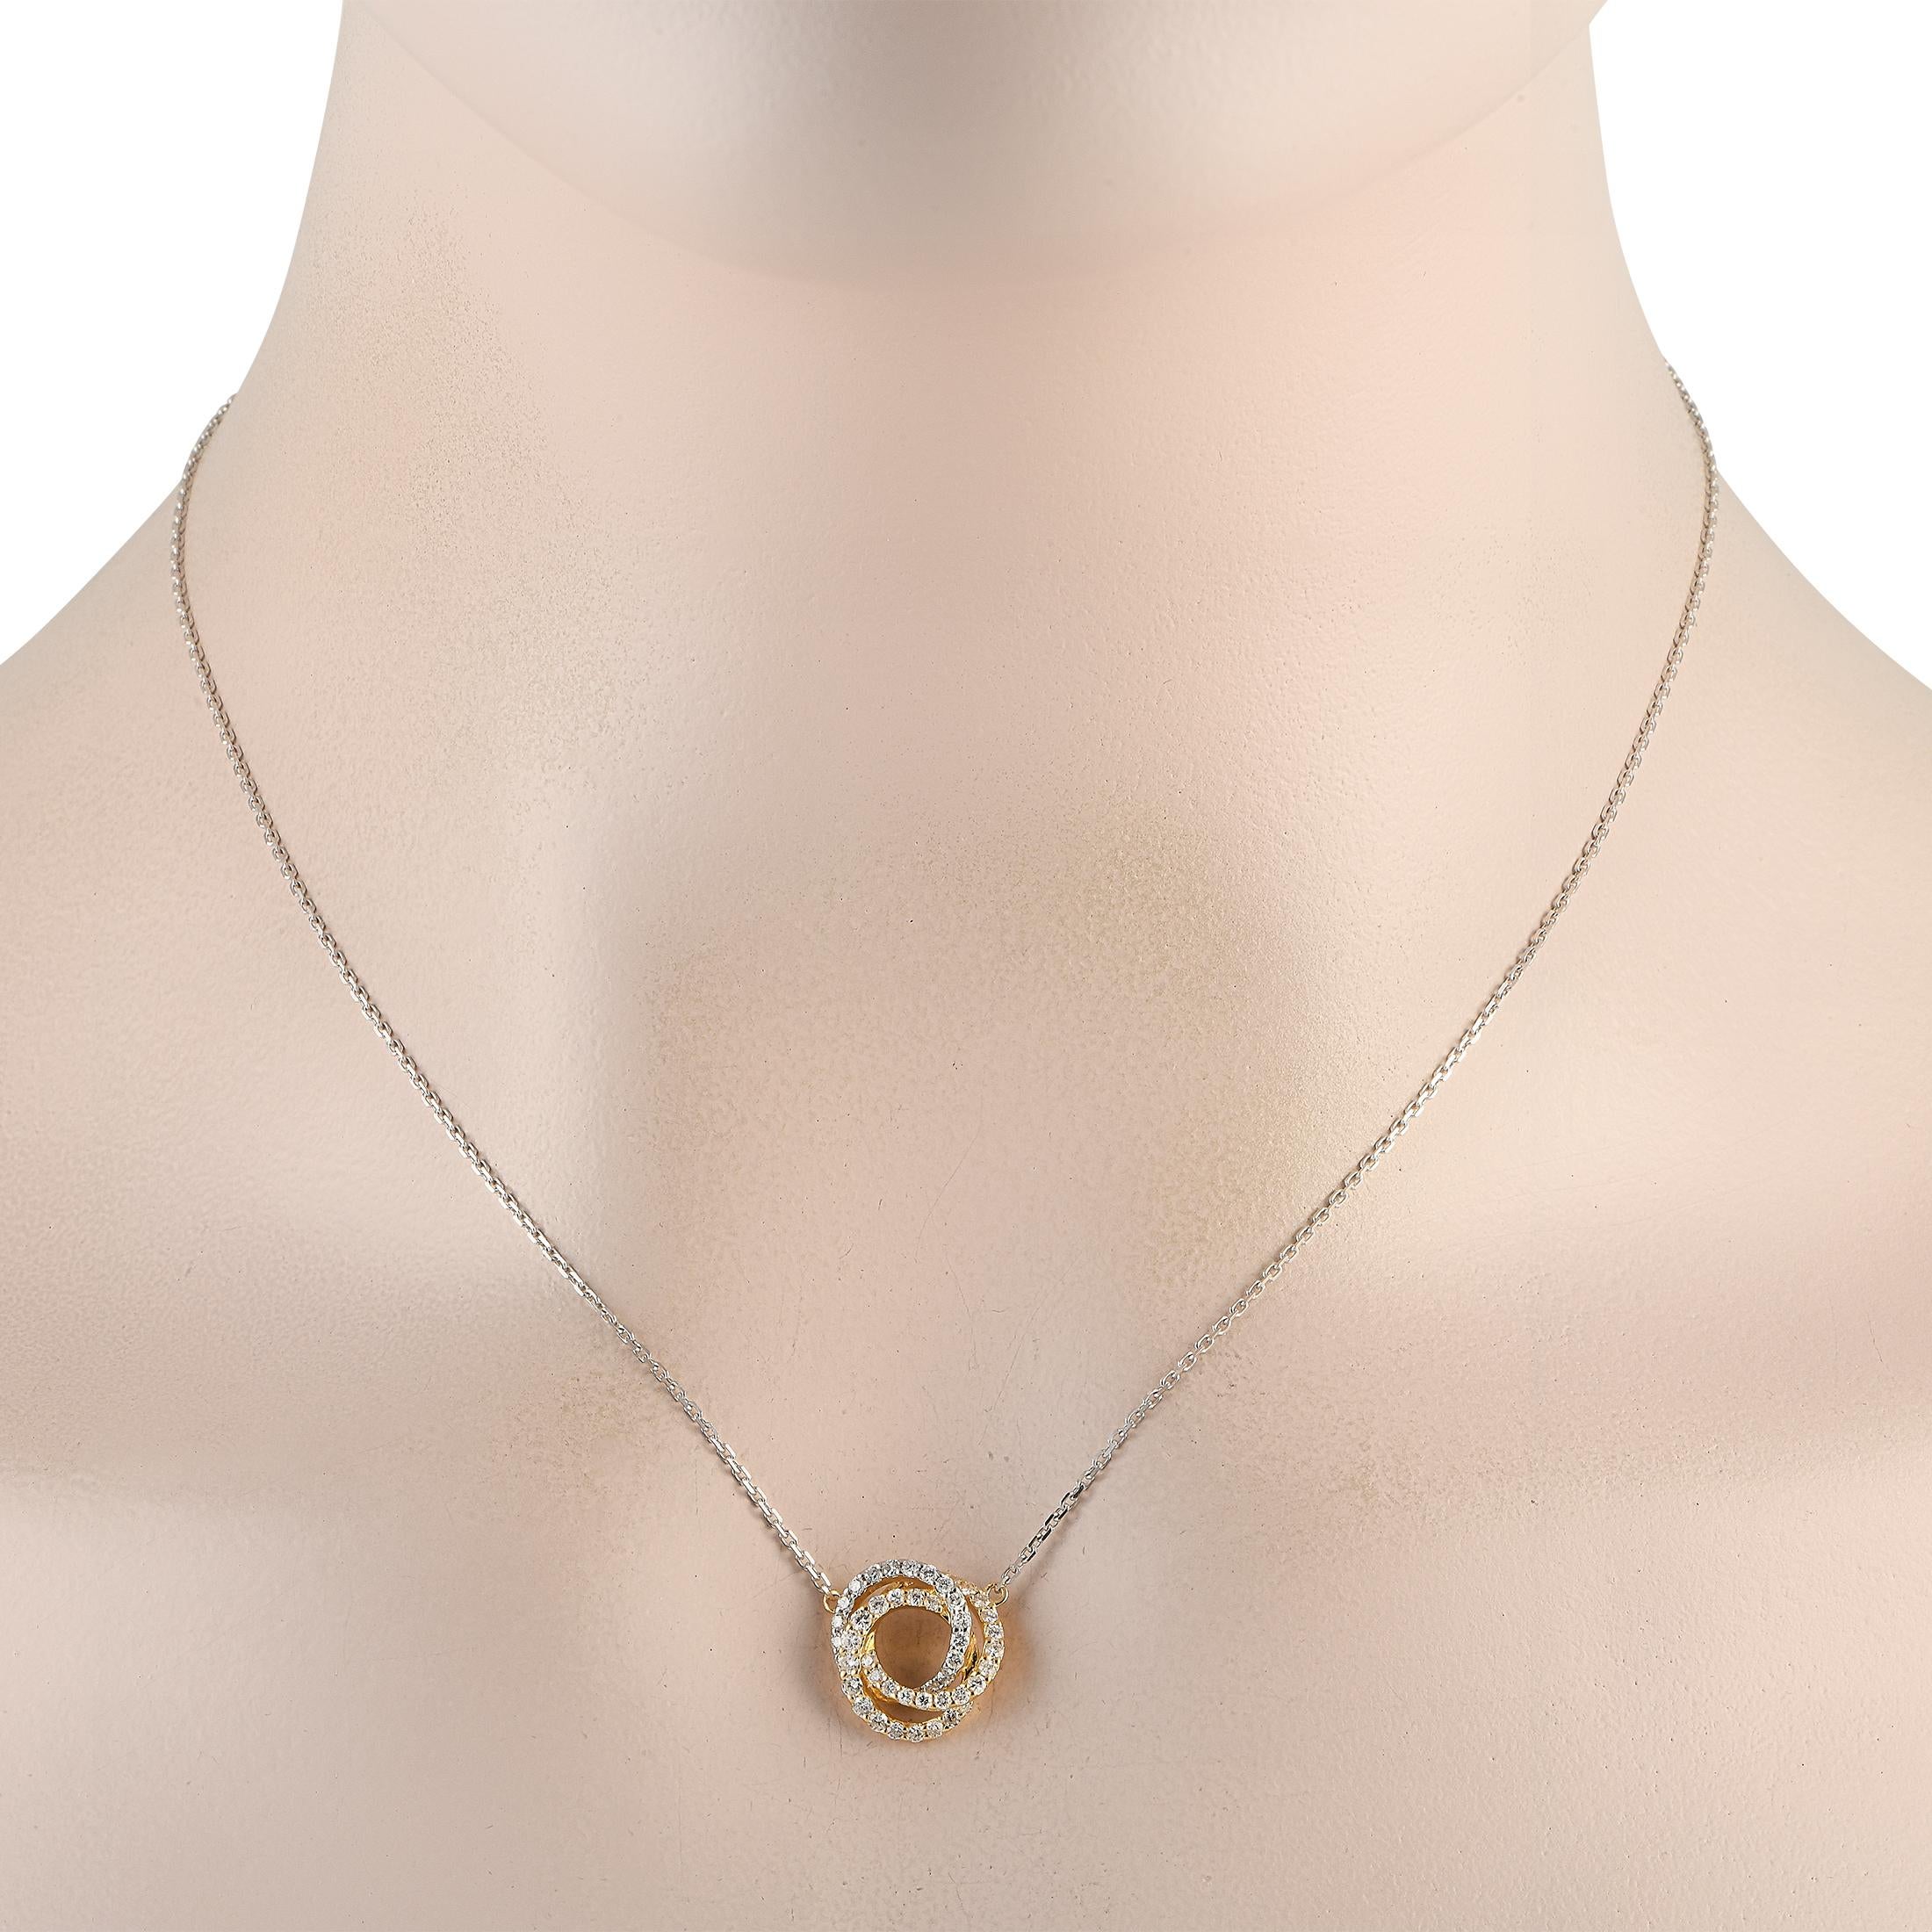 An instant stand-out, this necklace can add a sophisticated flair to your wardrobe. It is made from 18K white and yellow gold and has three interlocking rings for its pendant. Each ring is outlined with round diamonds for a captivating